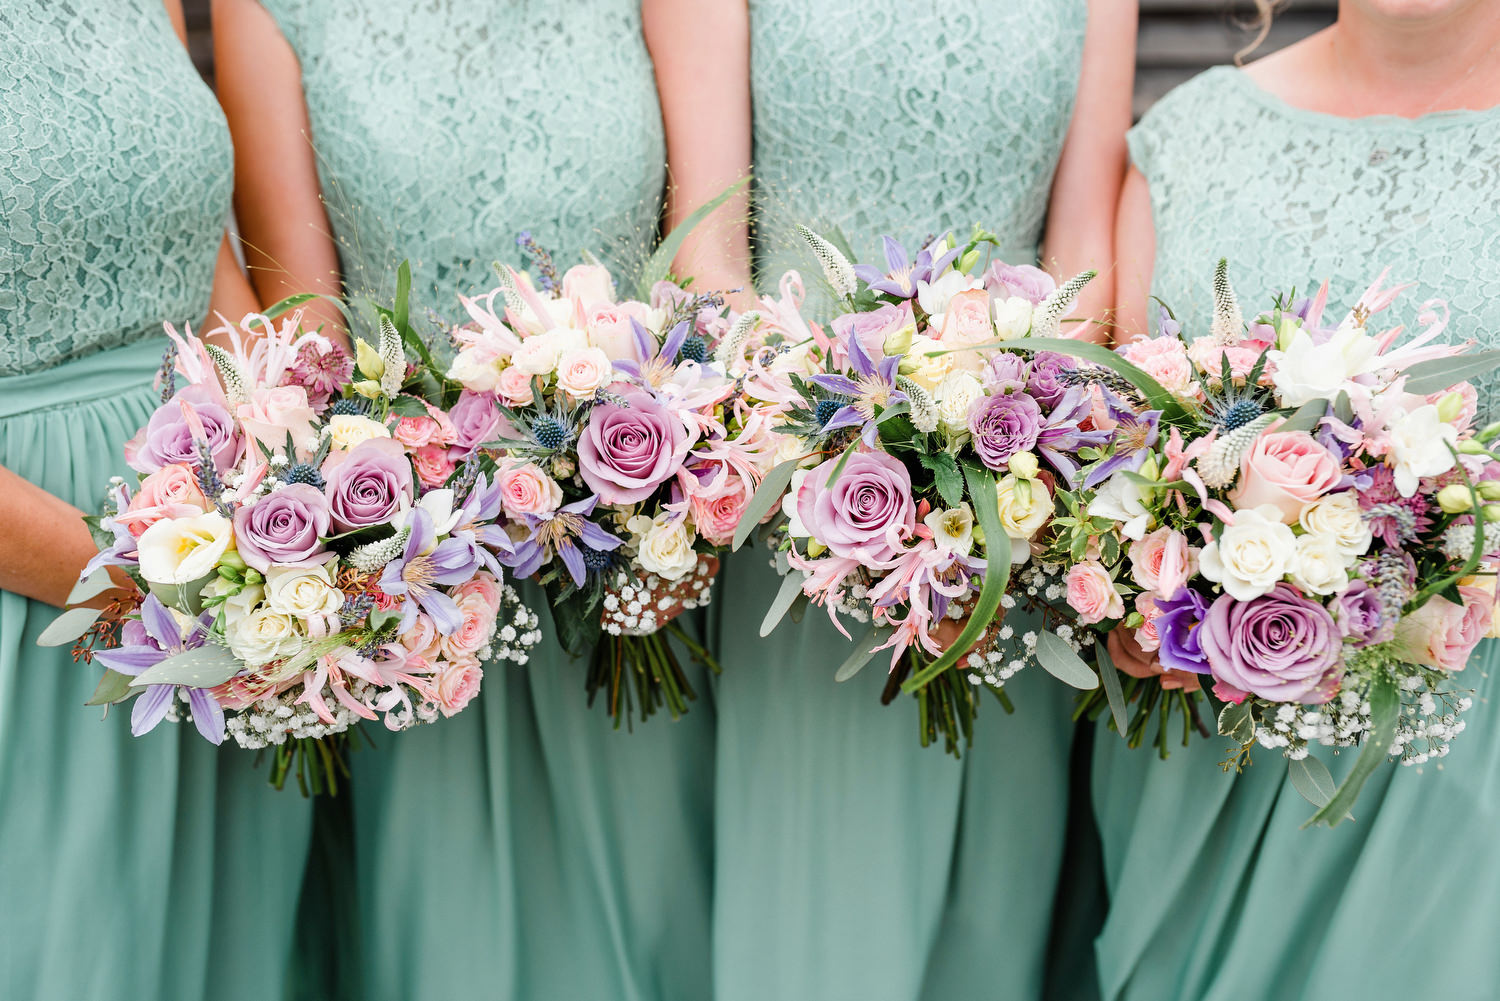 Bridesmaids with flowers